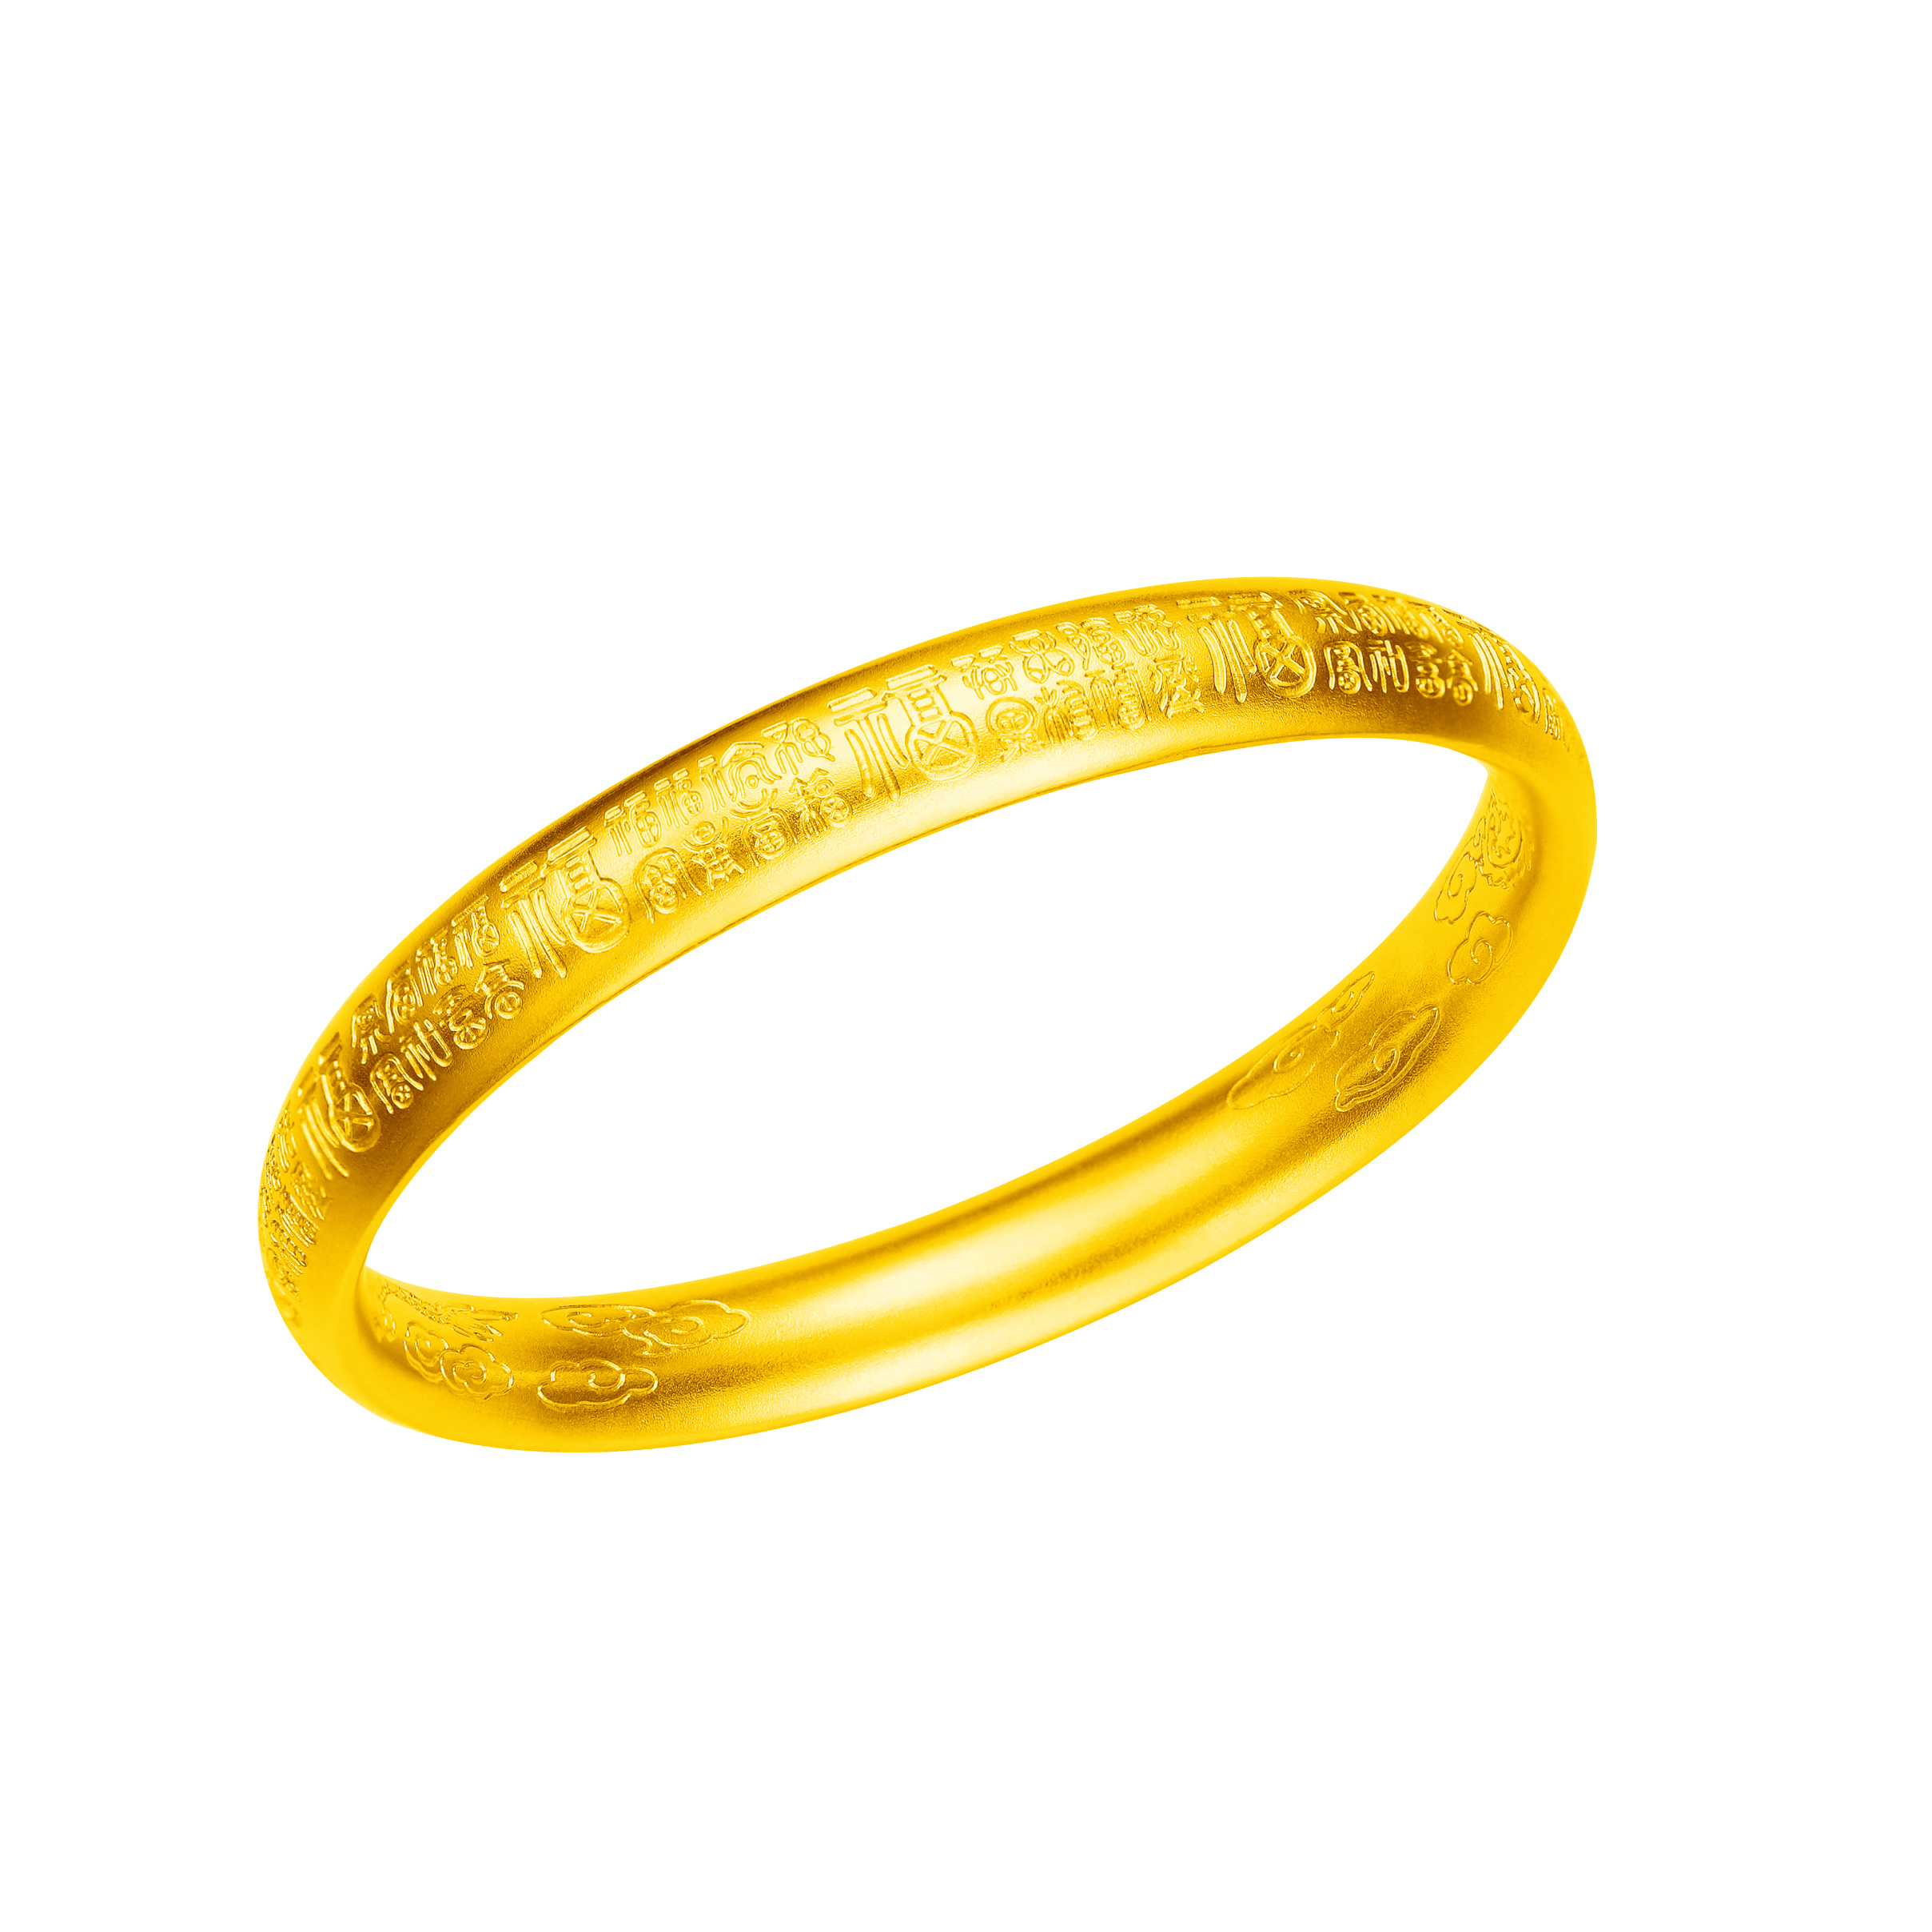 Antique Gold "Blessings" Gold Bangle